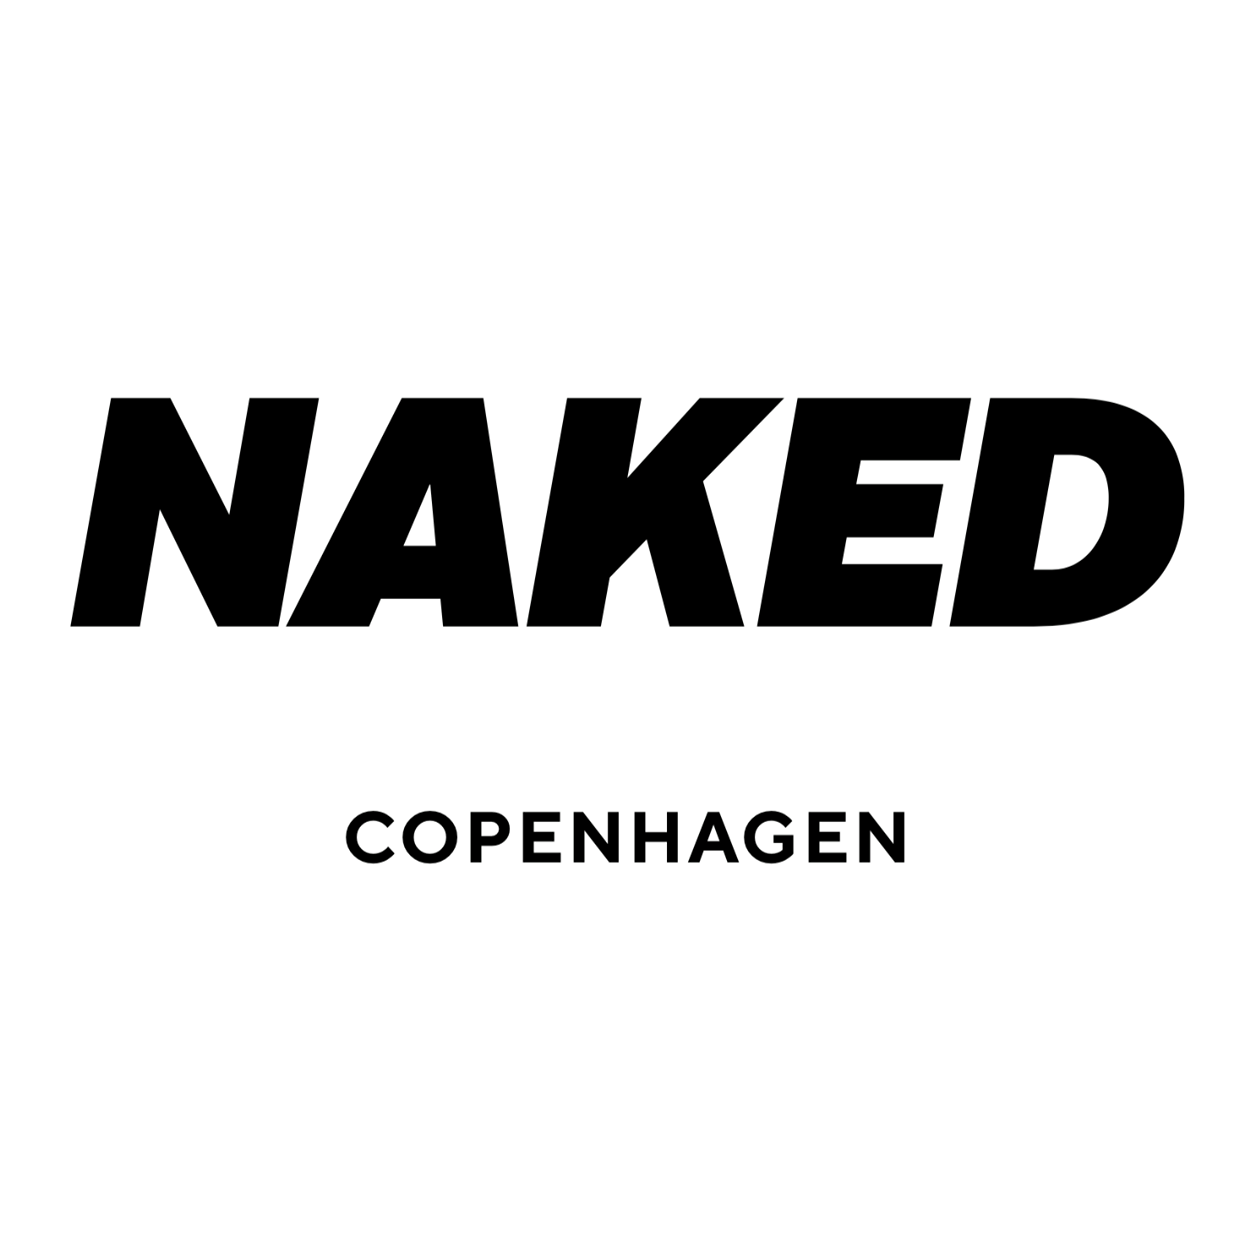 Limited edition shoes NAKED Copenhagen Forum